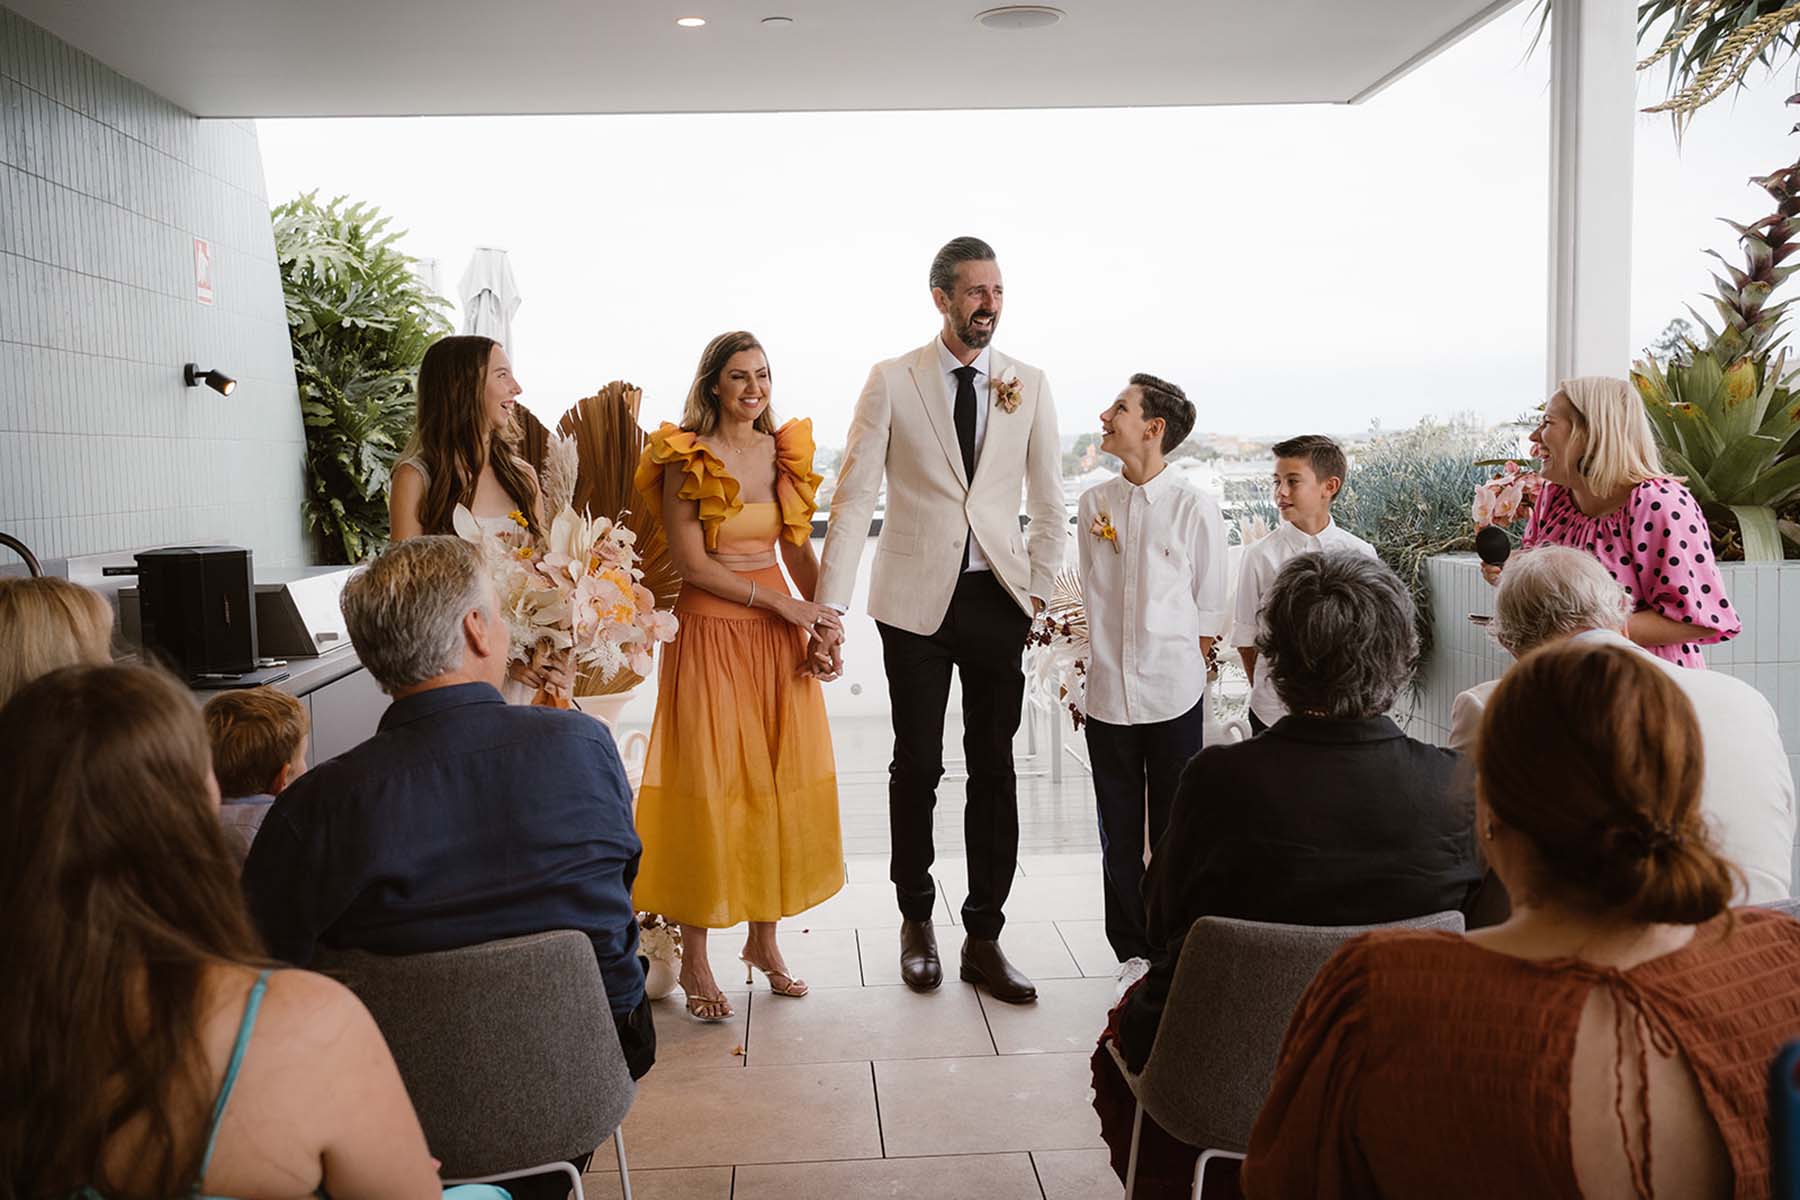 The Calile Hotel Rooftop Elopement Ceremony